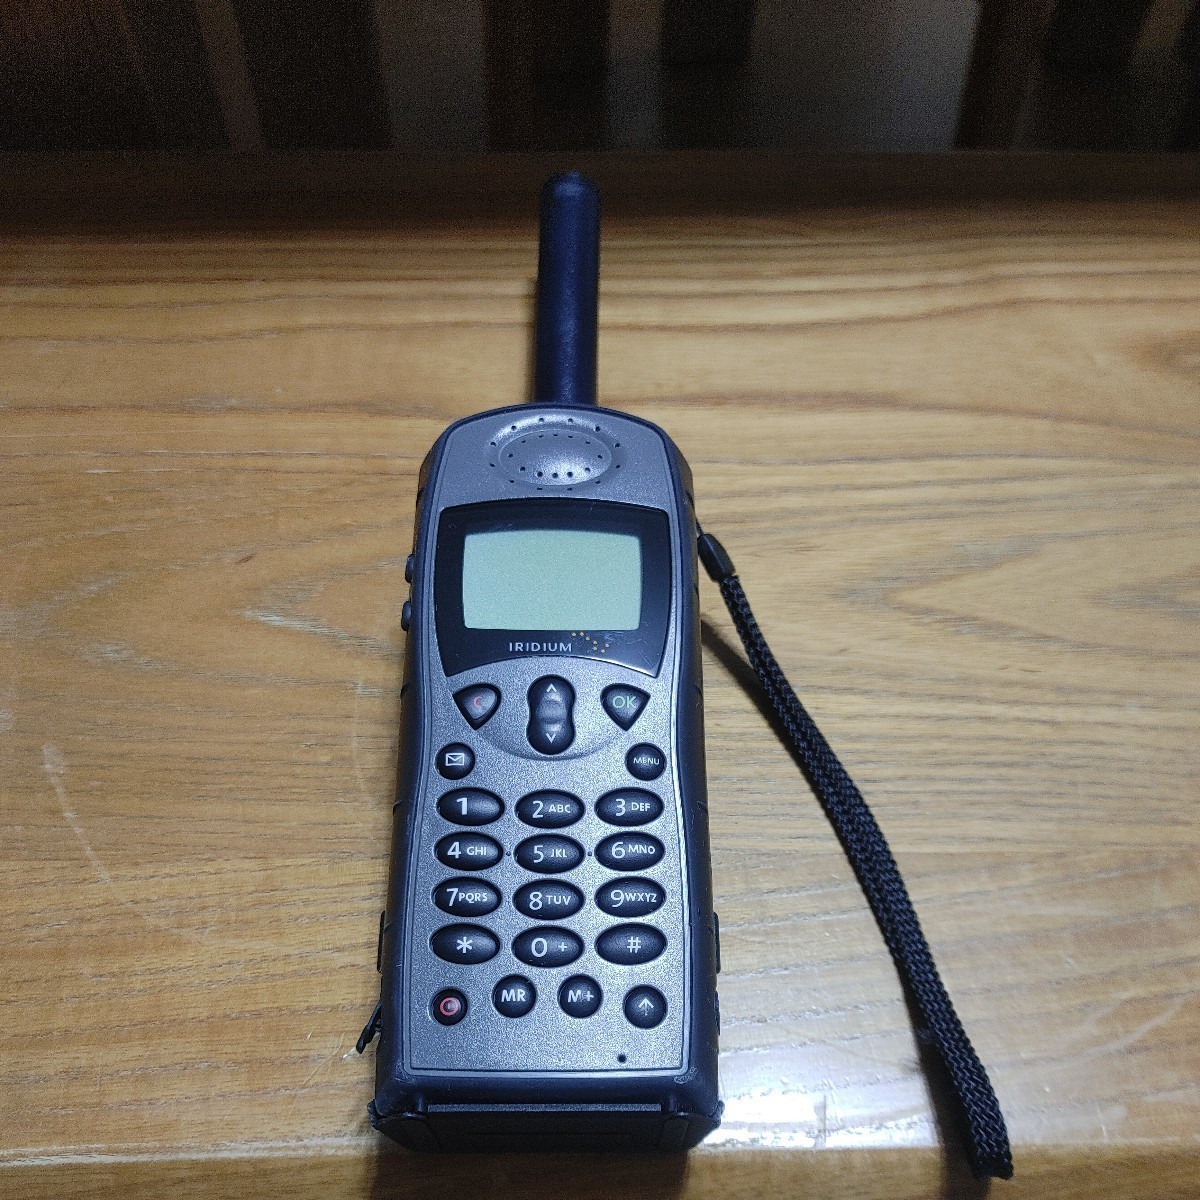 Iridium 9505A world among use is possible only. satellite mobile telephone 